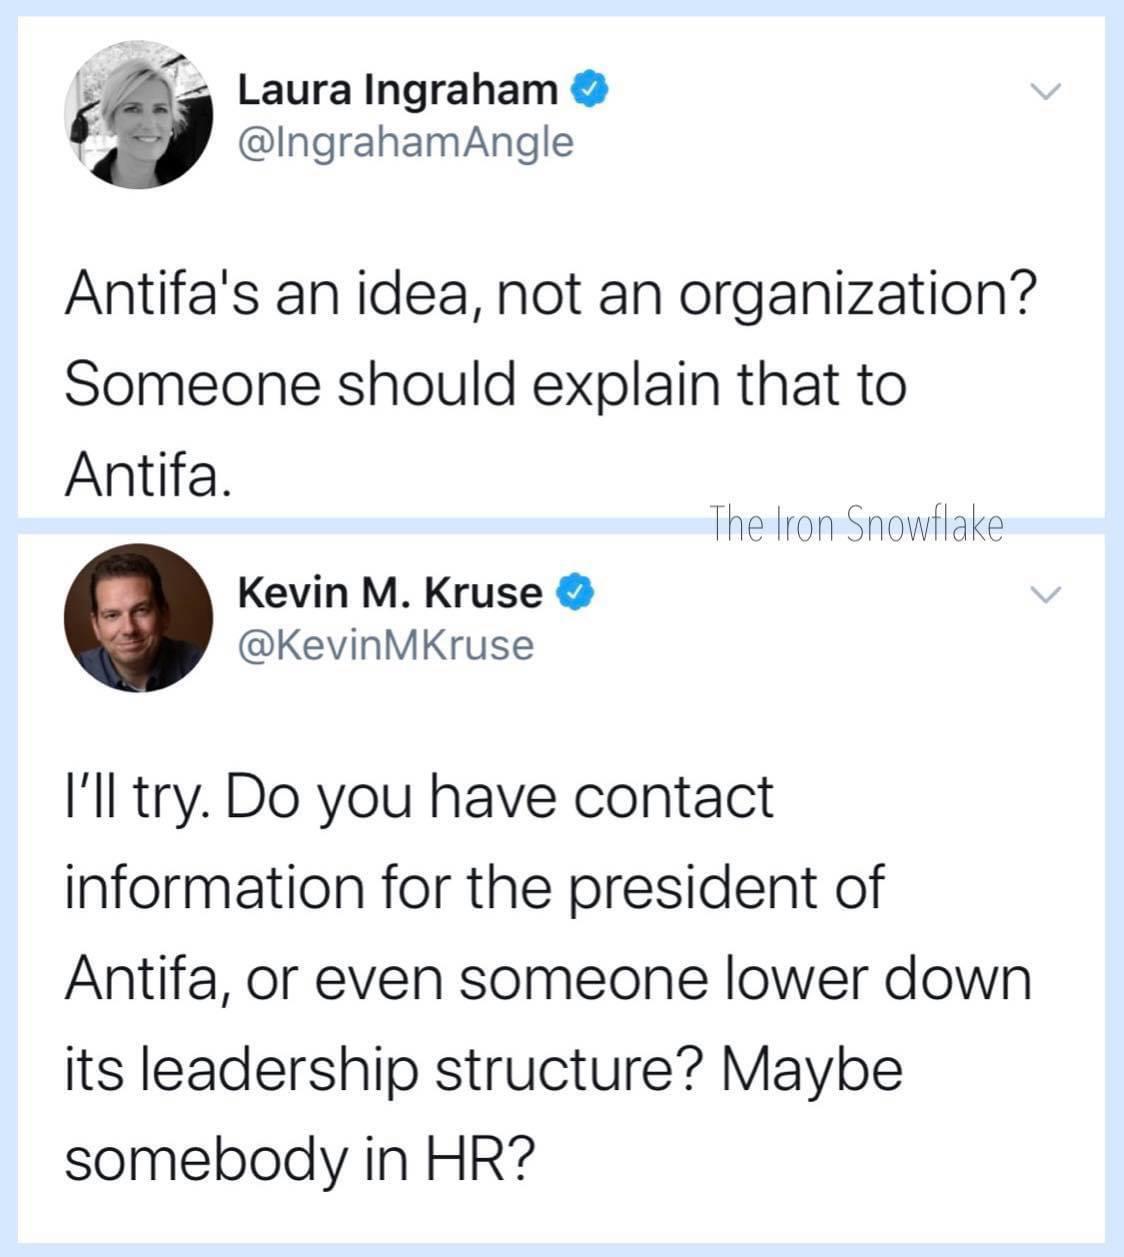 funny comments - Antifa's an idea, not an organization? Someone should explain that to Antifa. - I'll try. Do you have contact information for the president of Antifa, or even someone lower down its leadership